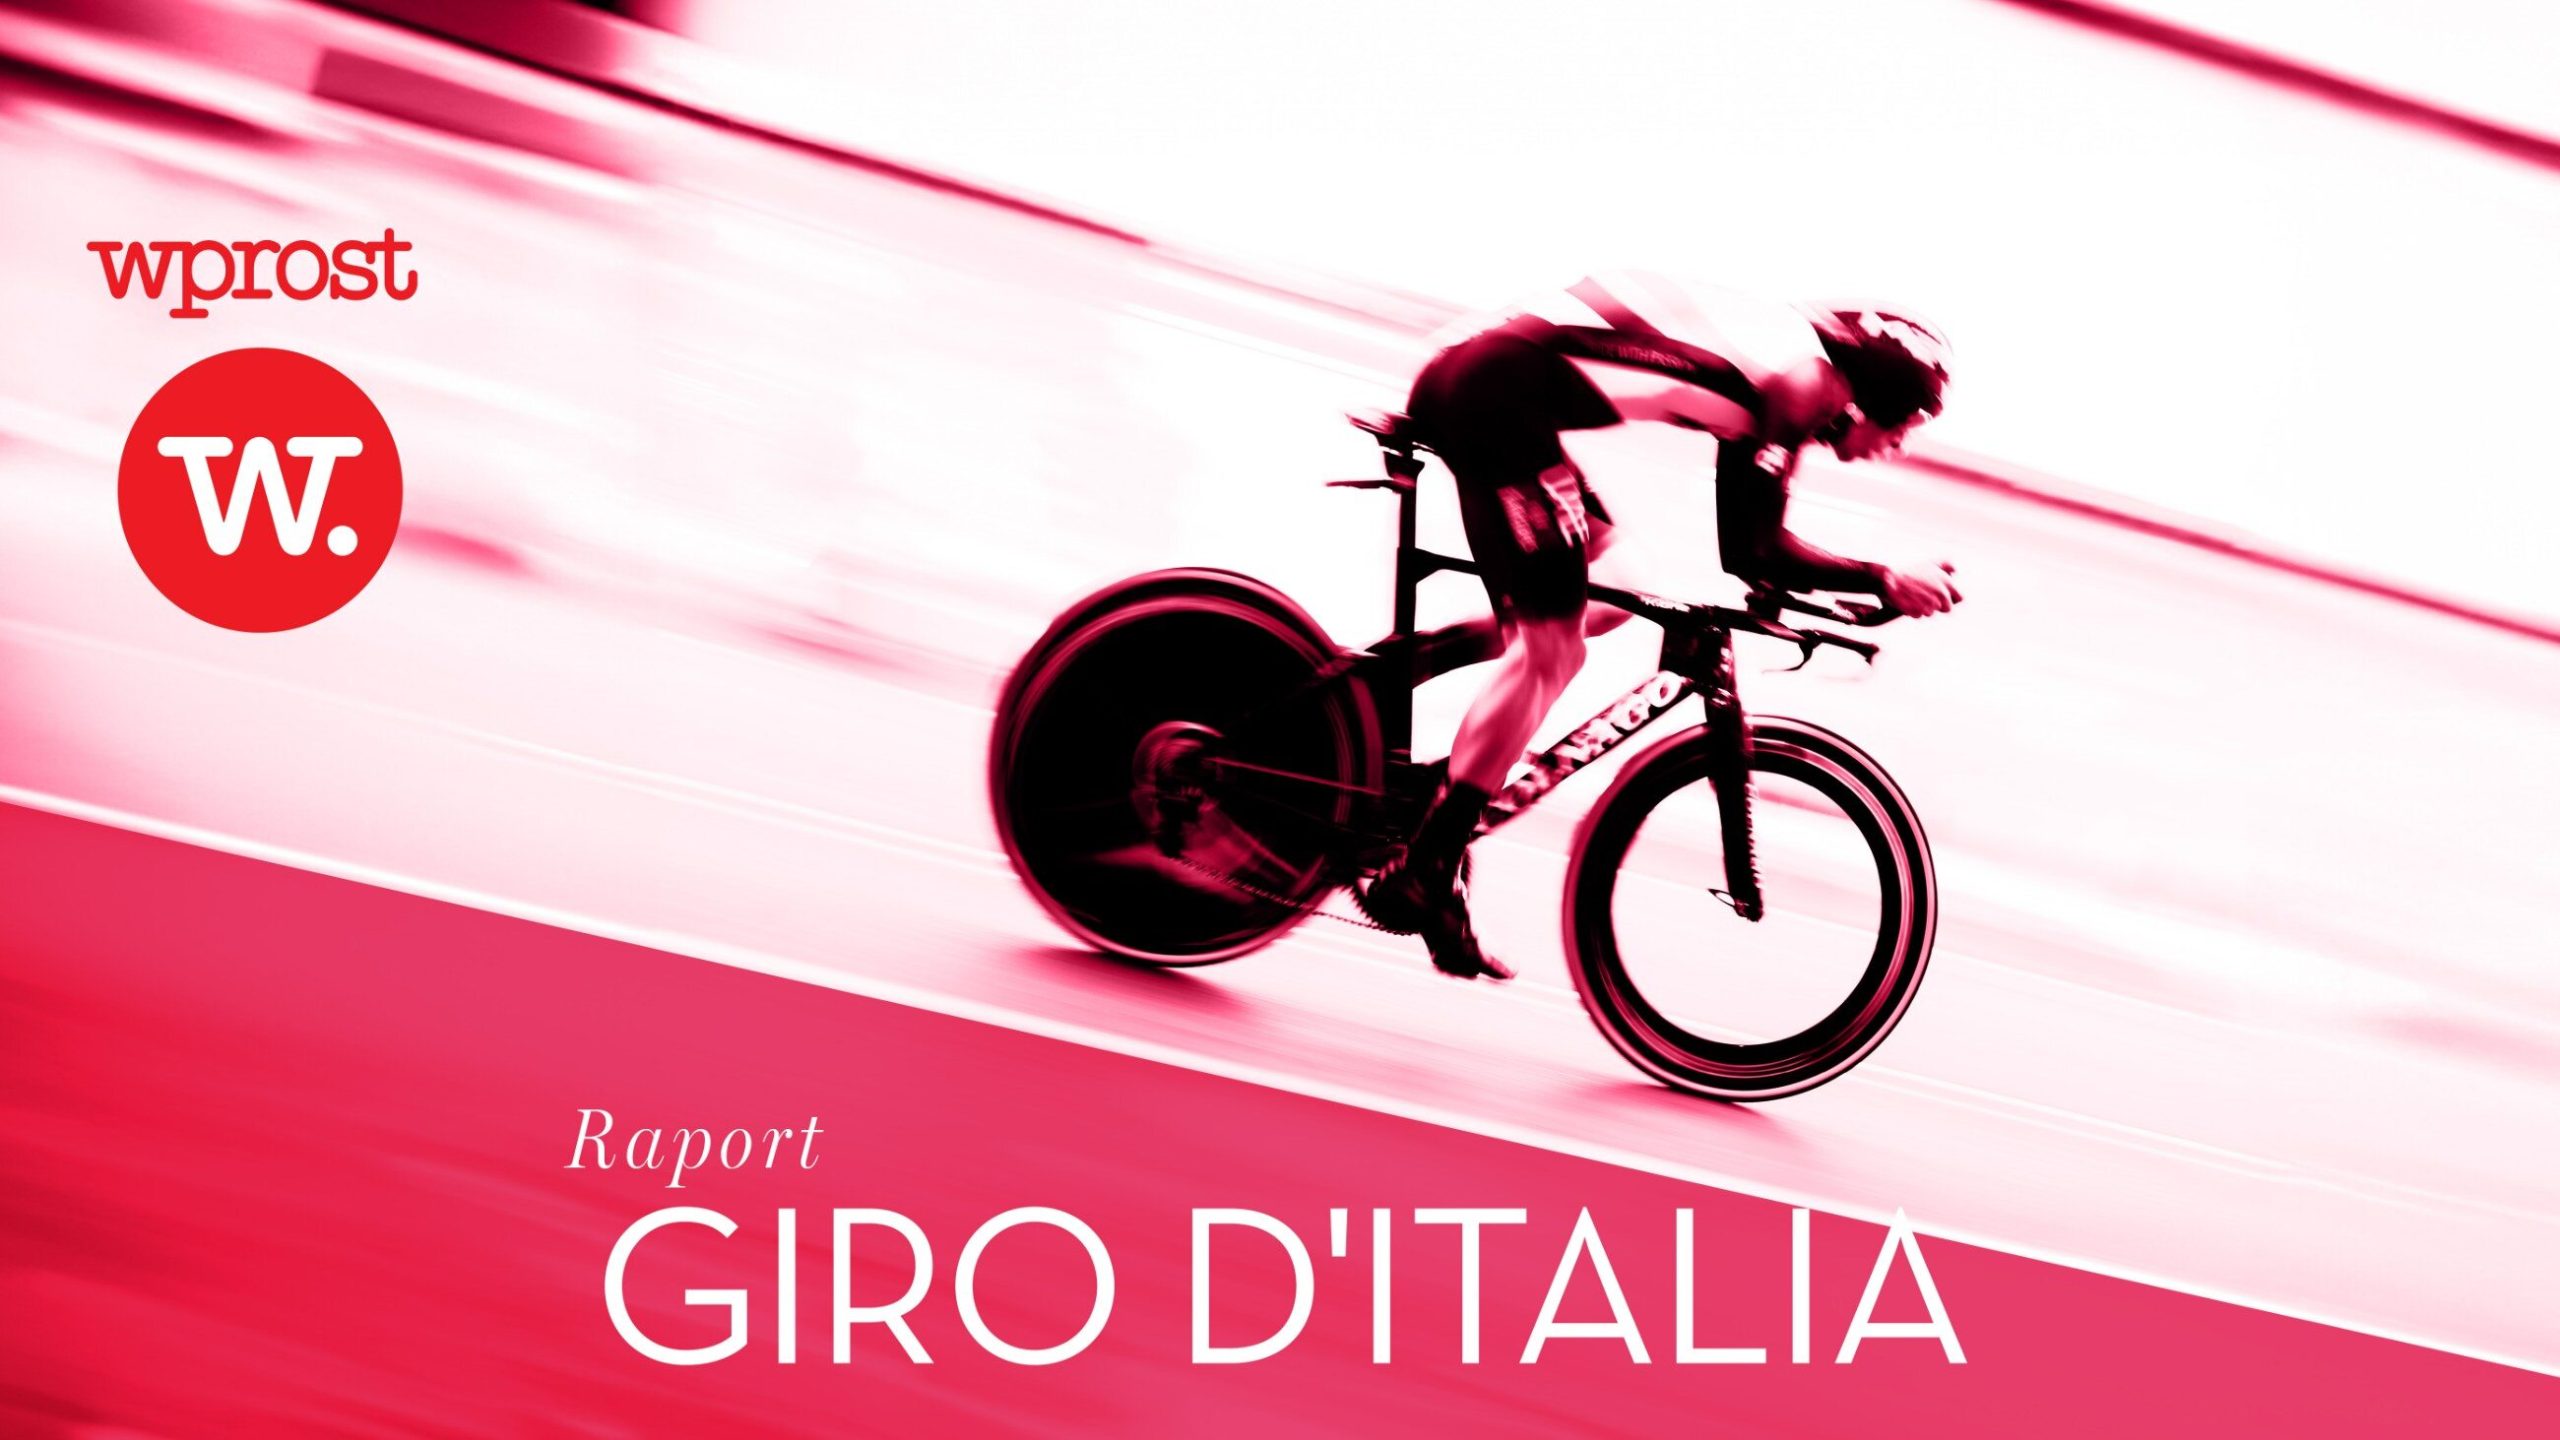 The world's toughest race in the most beautiful country in the world.  The "pink race" of the Giro d'Italia is underway